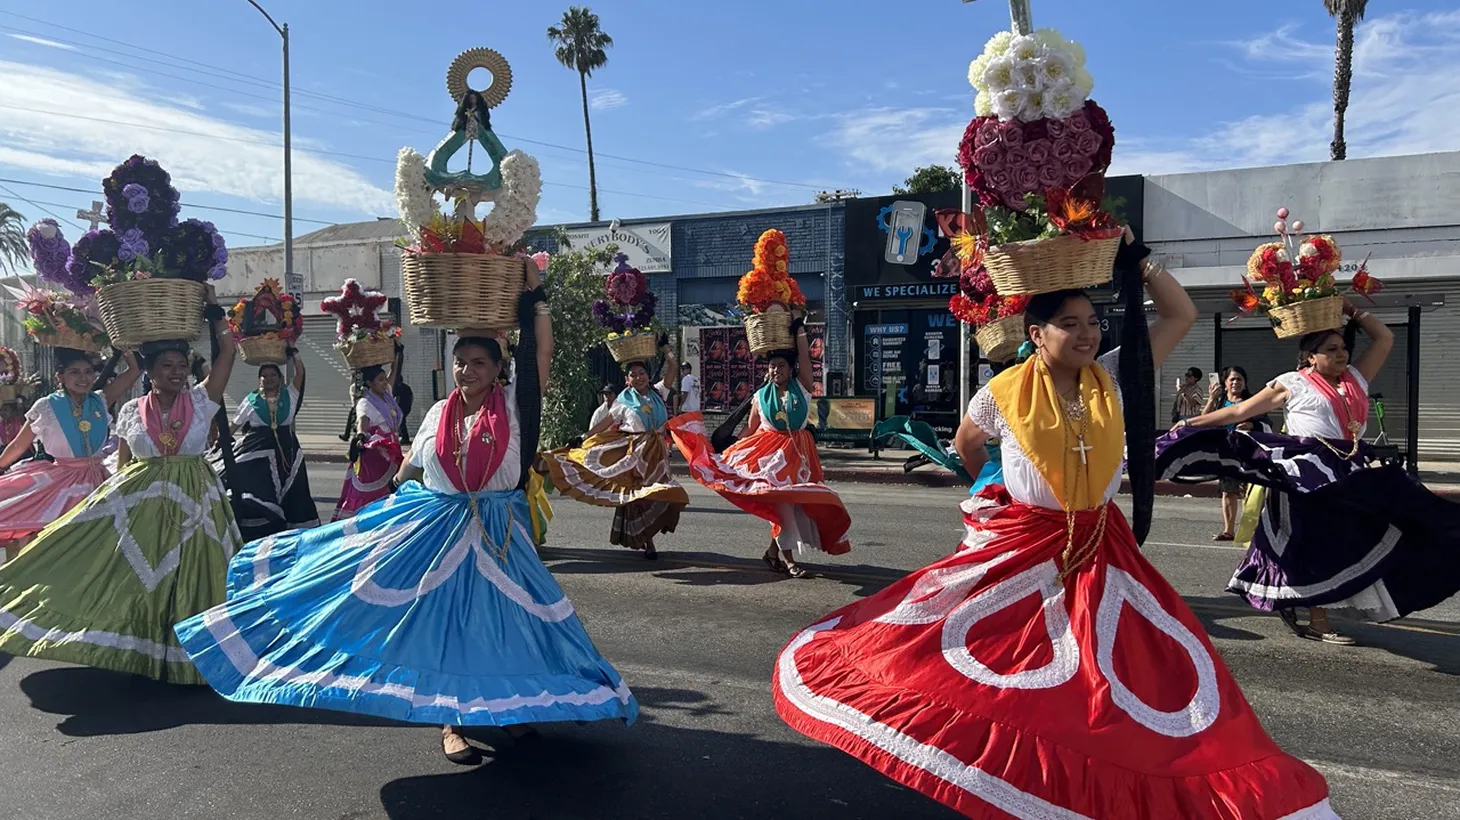 Oaxacan Angelenos parade down Pico Boulevard east of Crenshaw in traditional outfits at the annual Convite Oaxaqueño. Community members are lobbying to rename this stretch of street the Oaxacan Corridor.